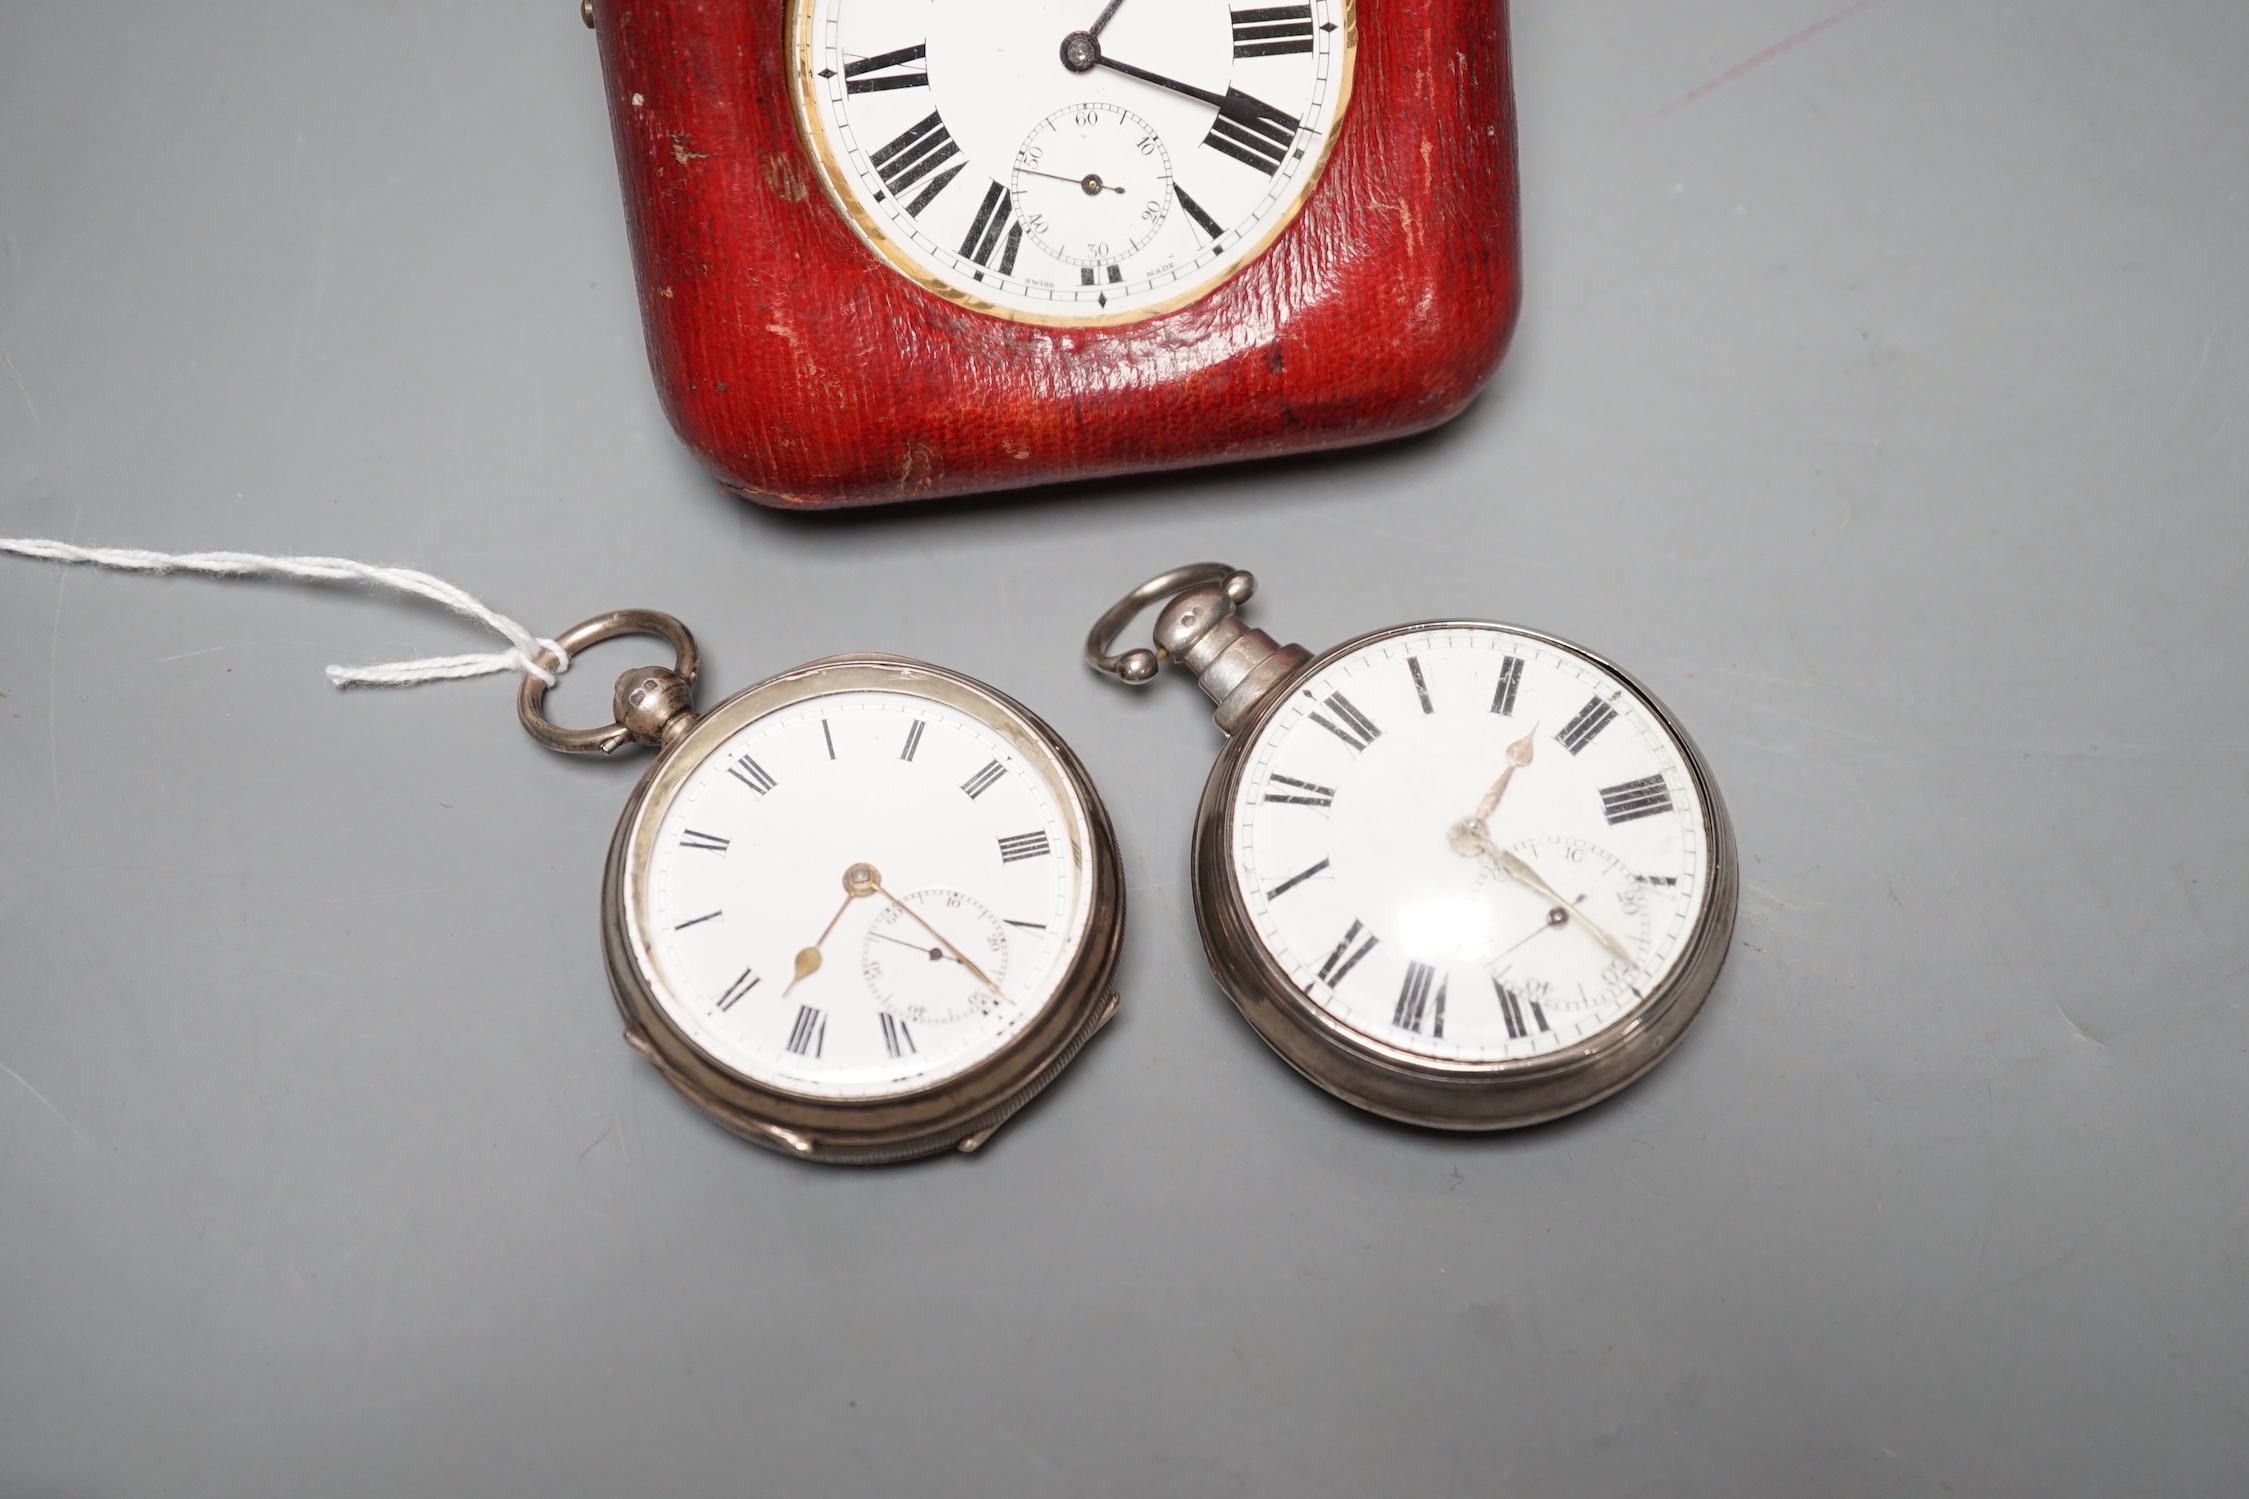 A George IV silver pair cased pocket watch by J. Levy & Son and two other pocket watches including one silver.